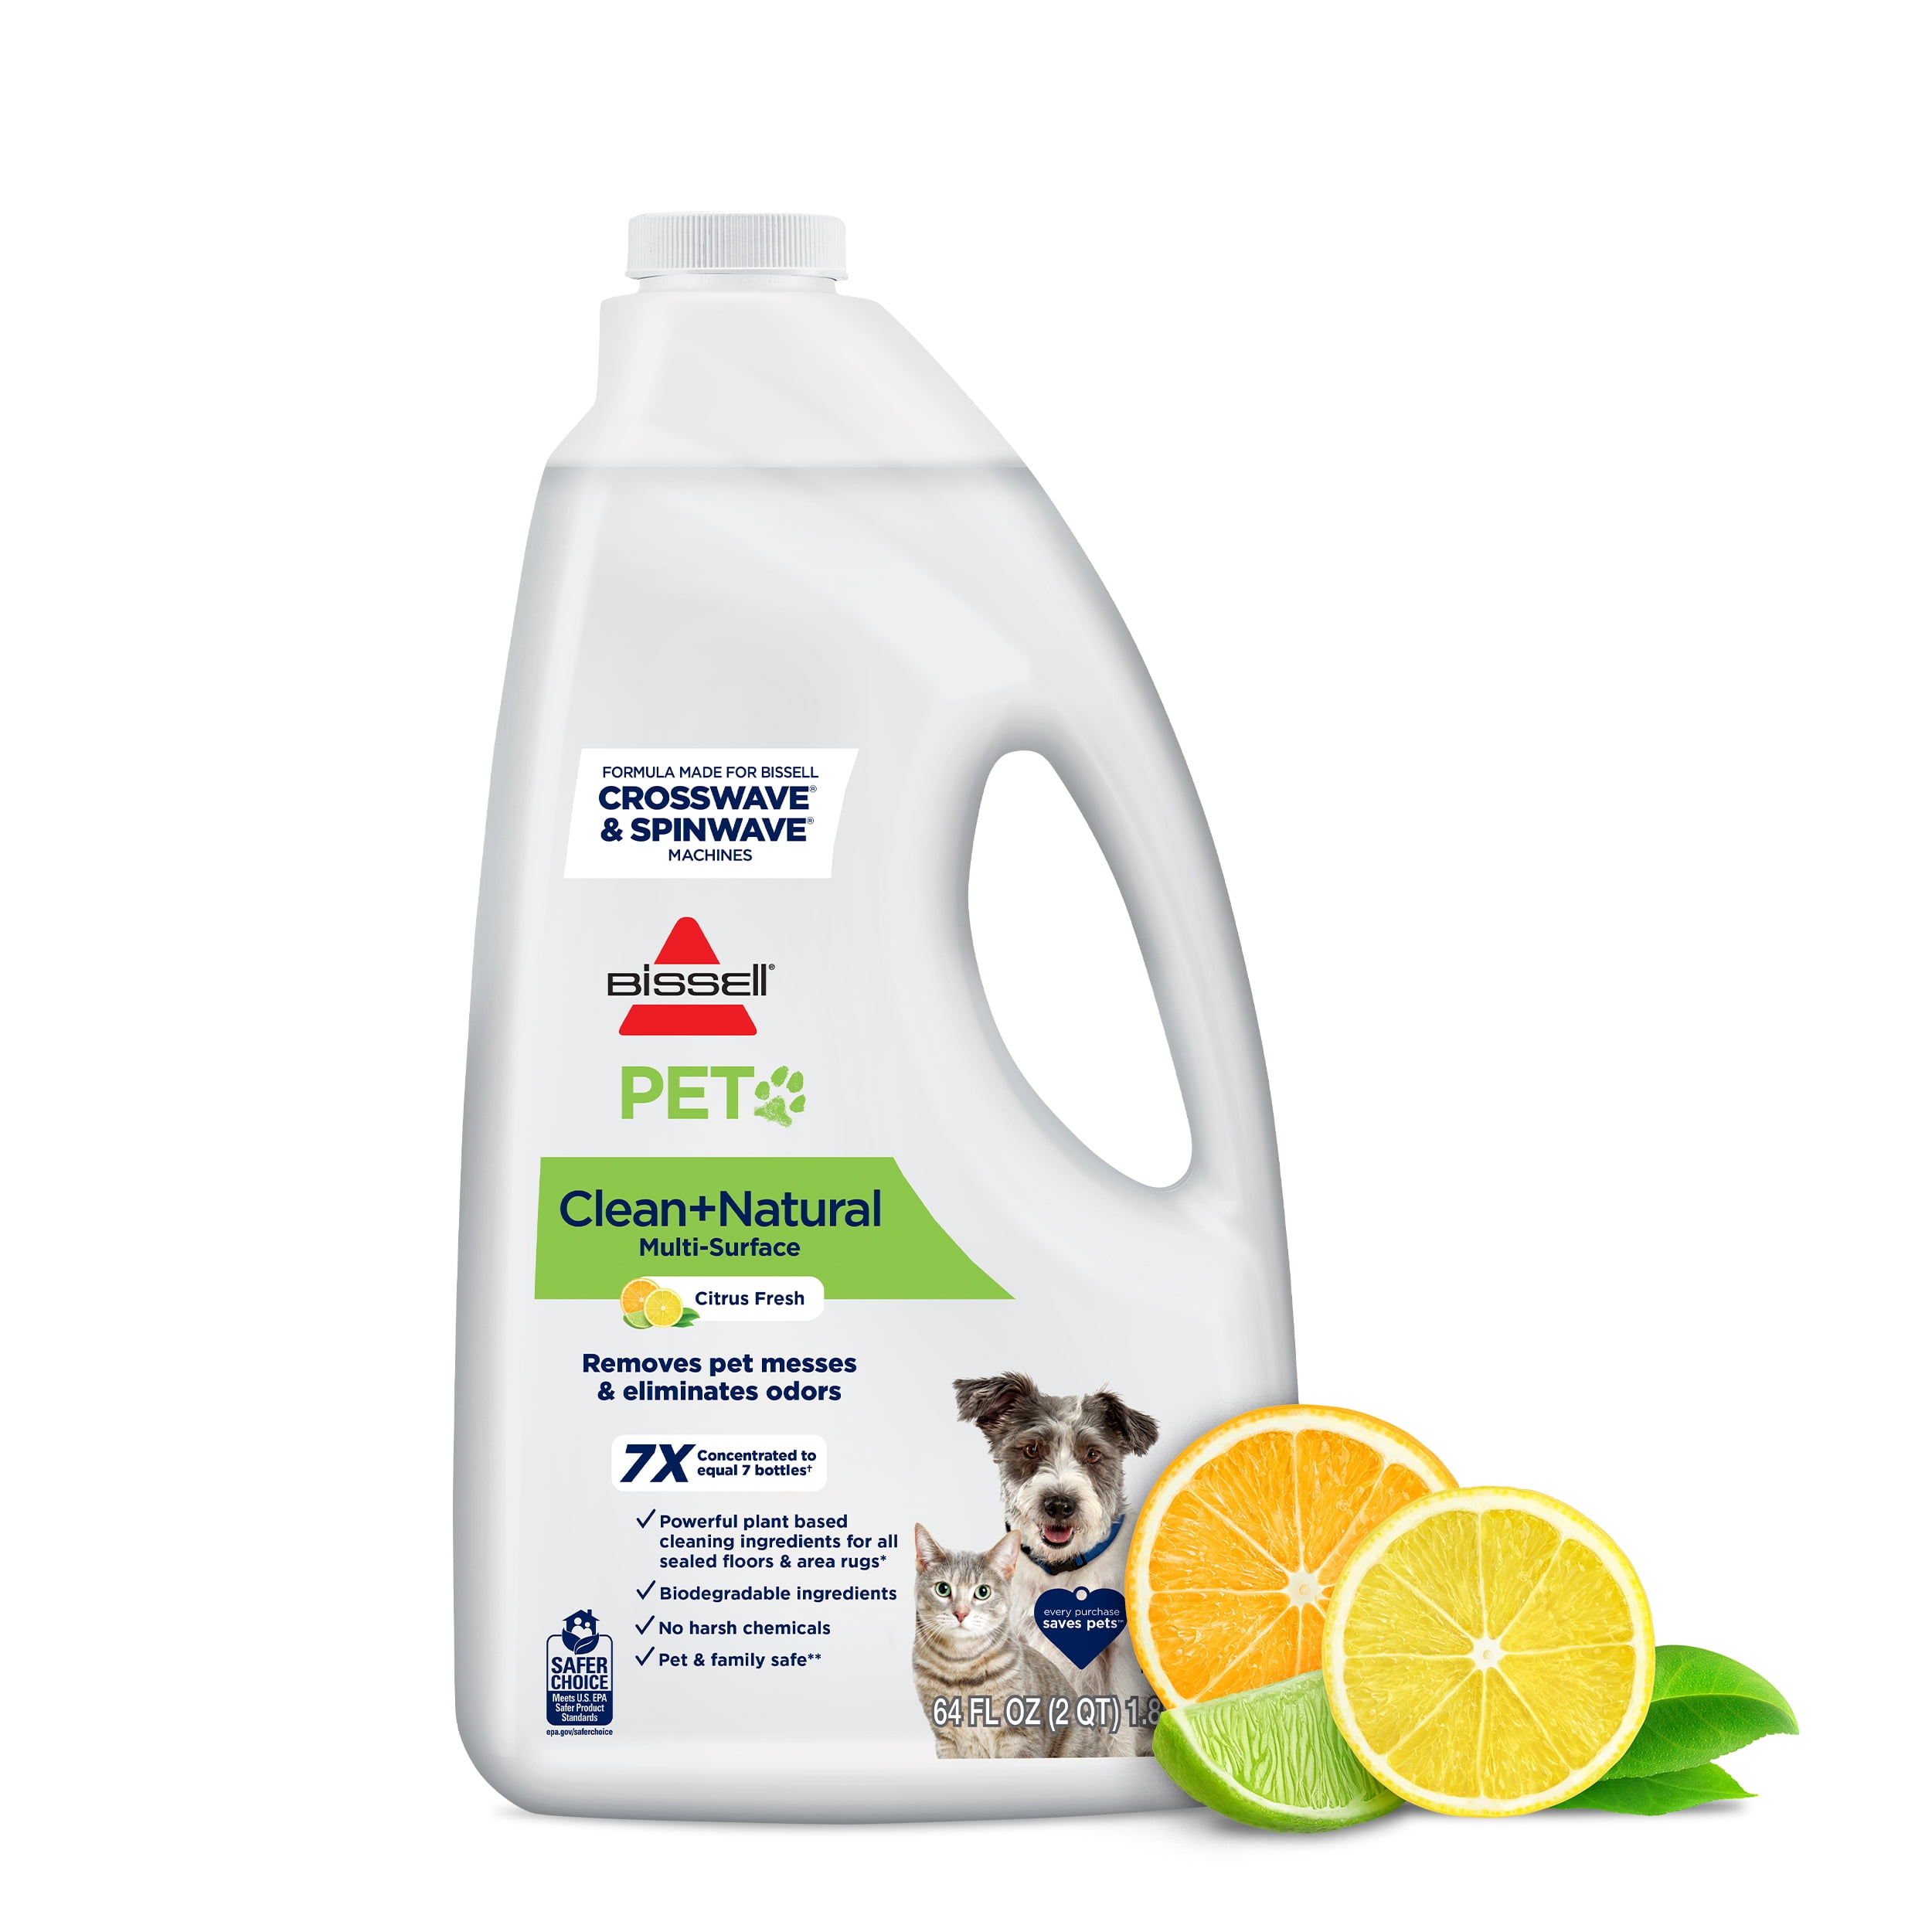 Pet clean. Bissell Pet. BUISSELL natural Multi surface Floor Cleaning solution. Clean Pet. Star Brite Multi-surface Pet Odor.